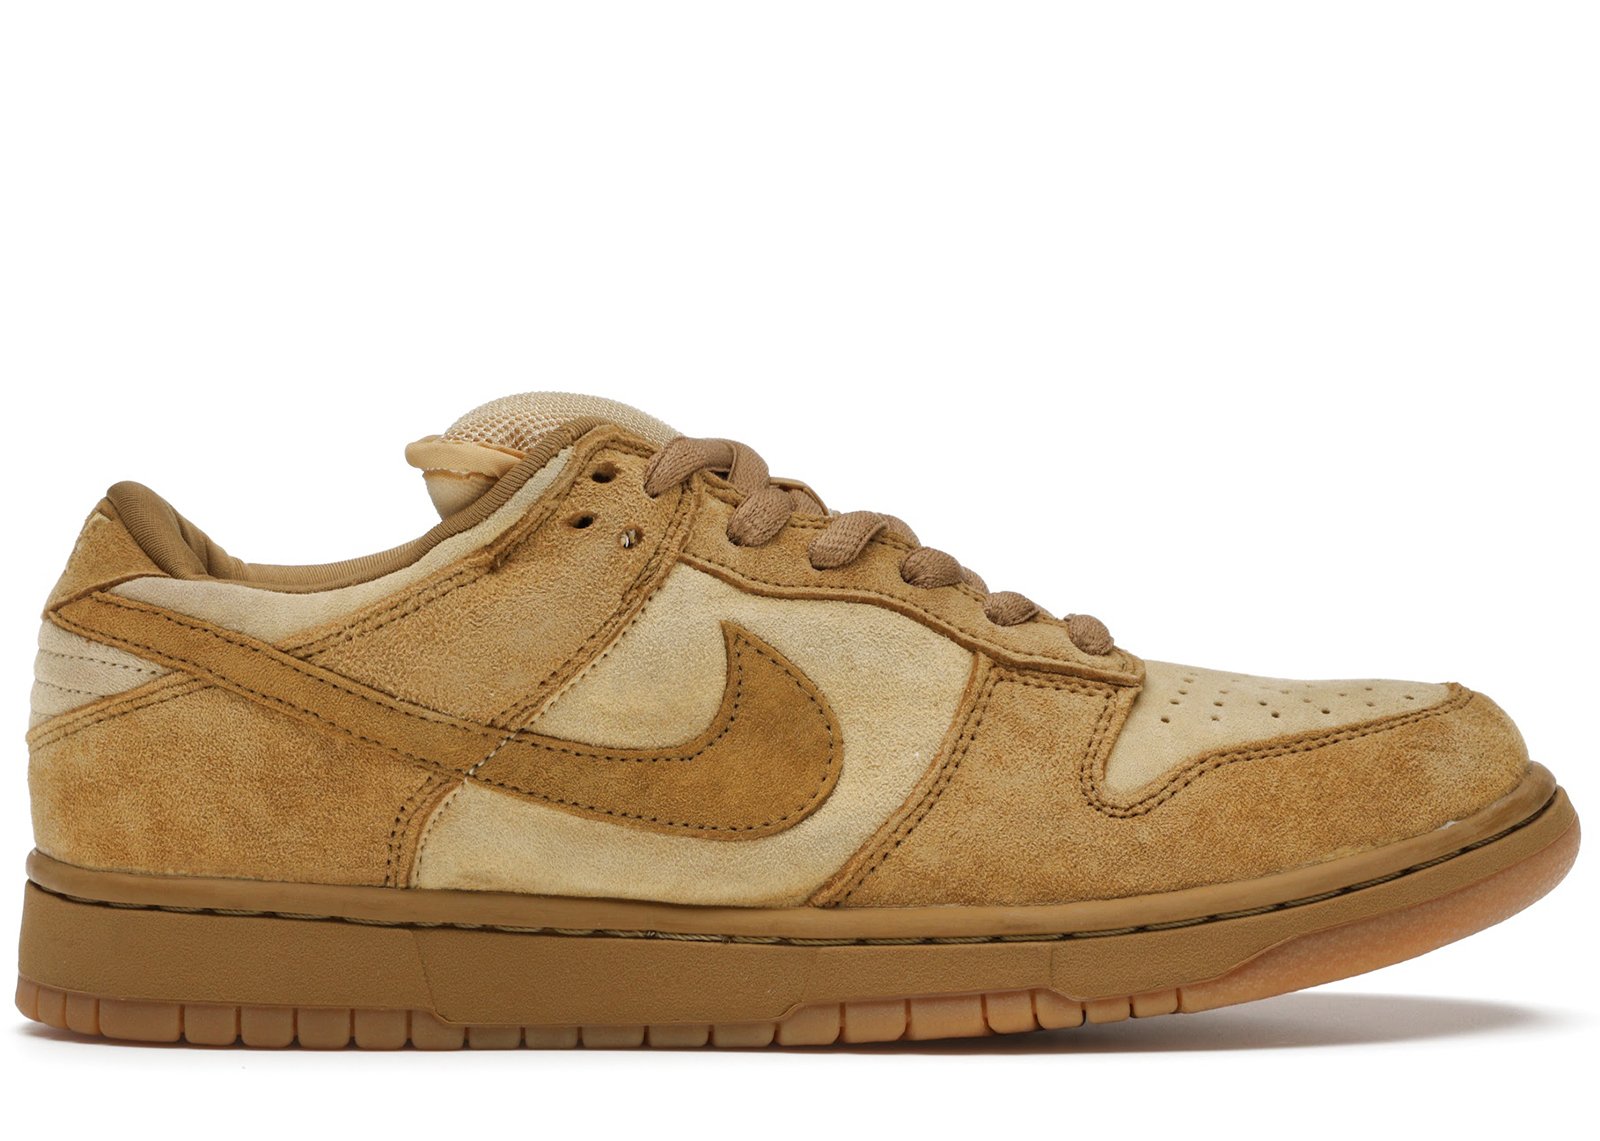 Nike SB Dunk Low Reese Forbes Wheat sneakers